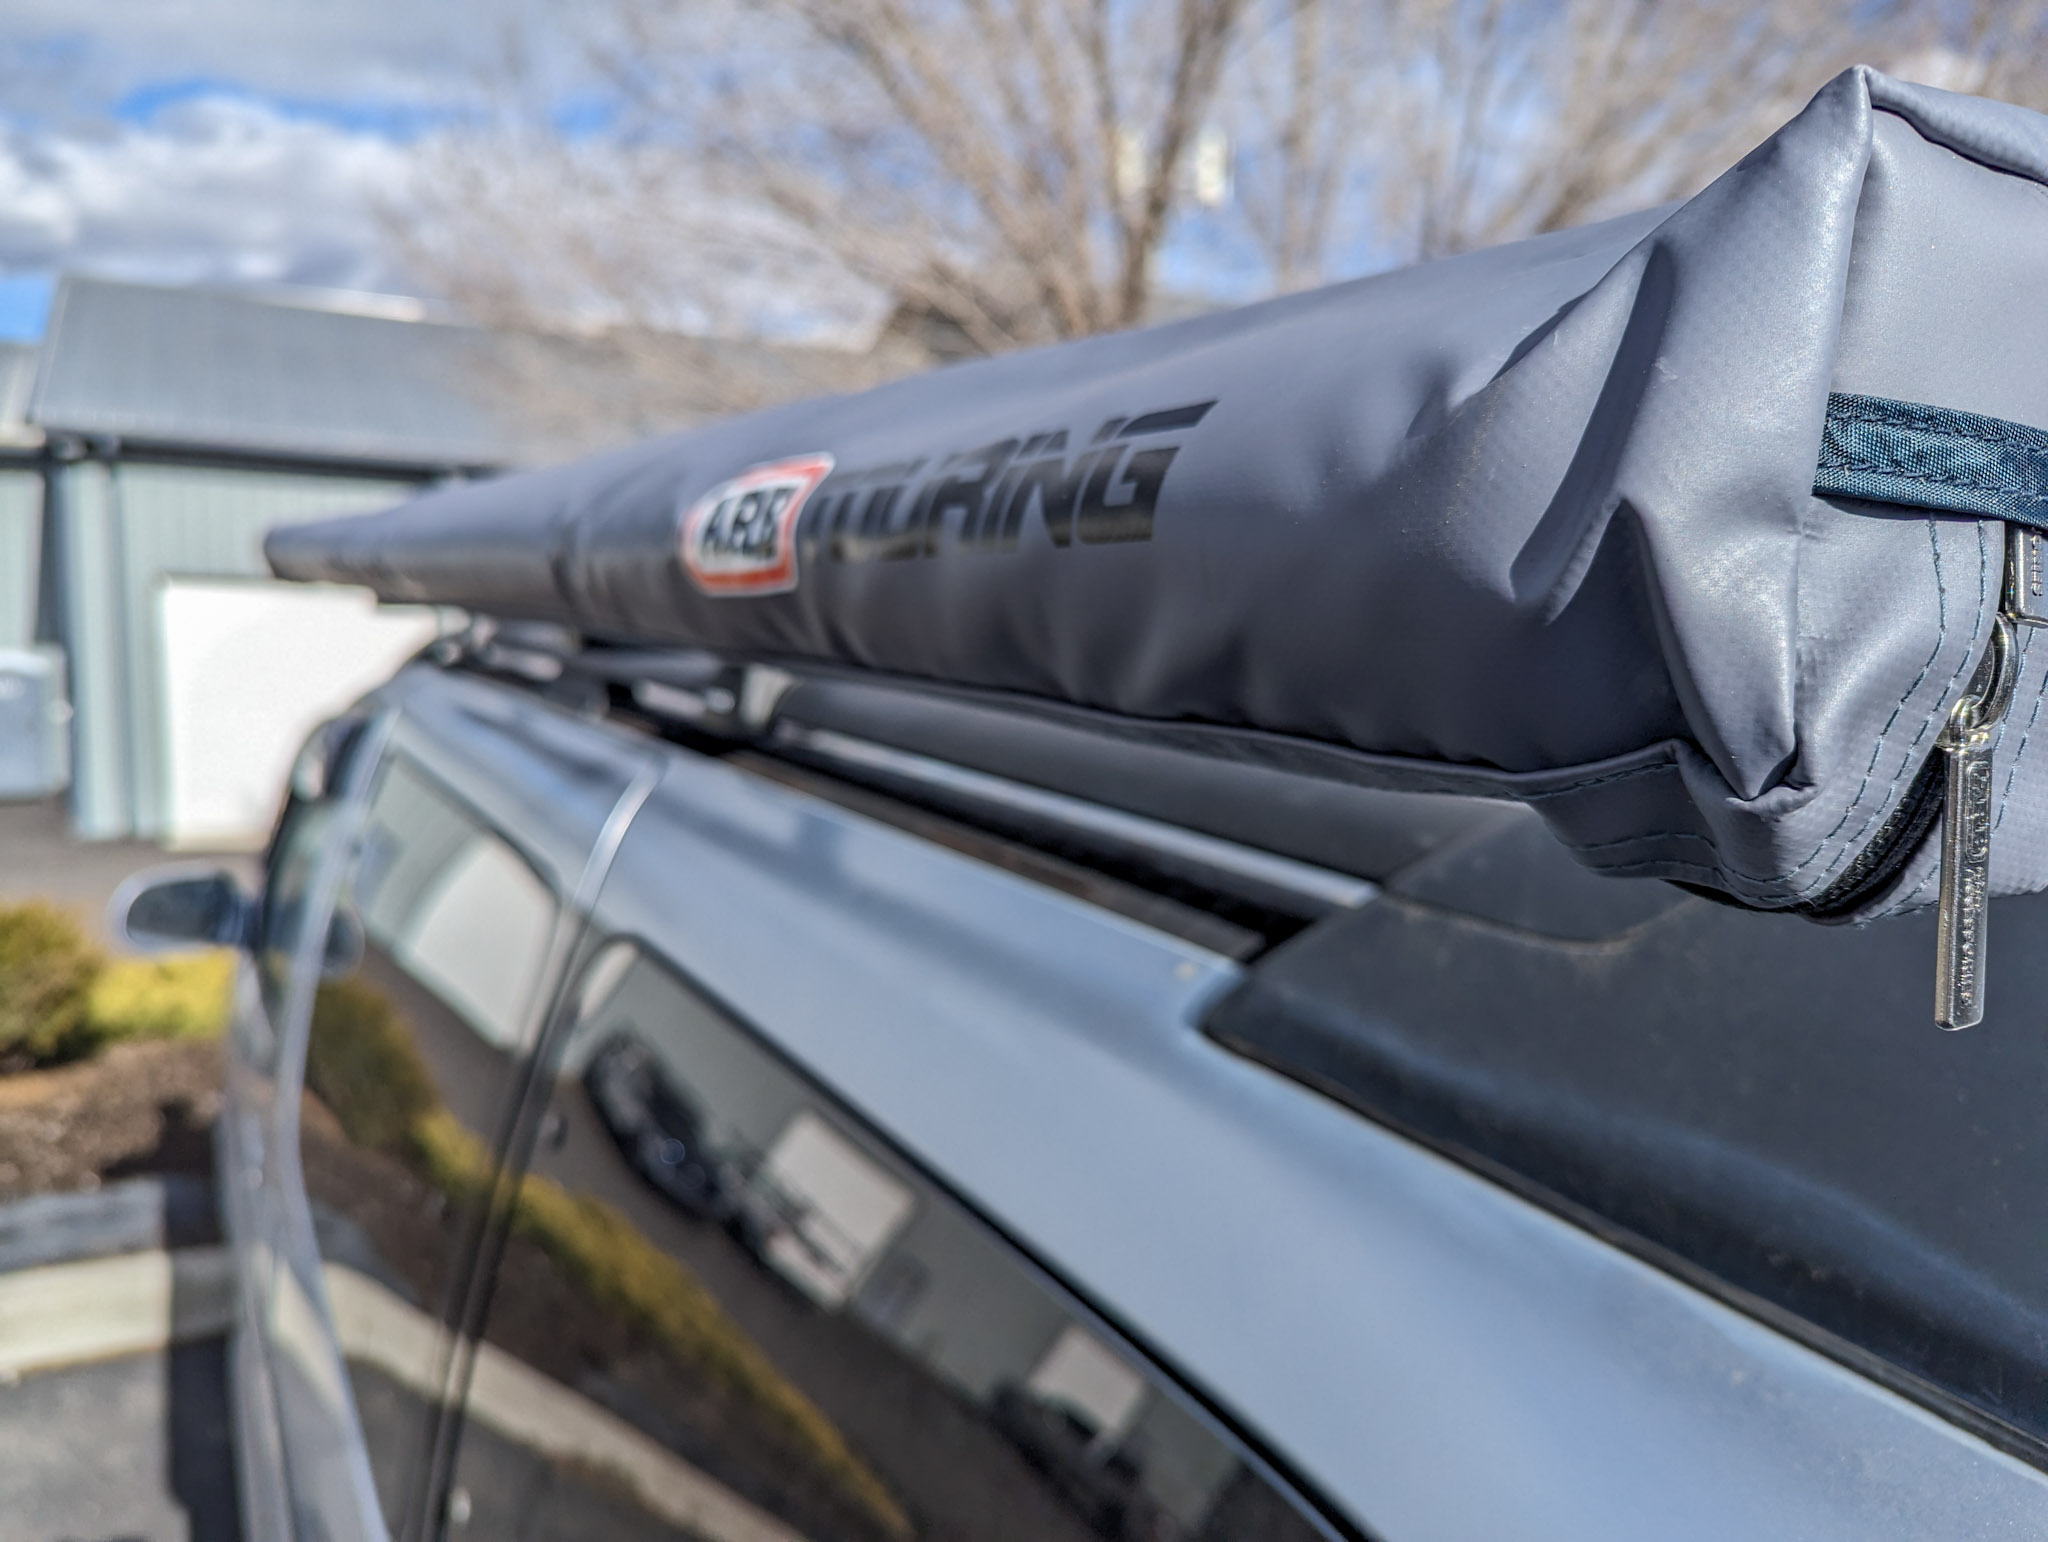 1998 Toyota HiAce - Roof Rack and Awning Installation - Rhino Rack and ARB